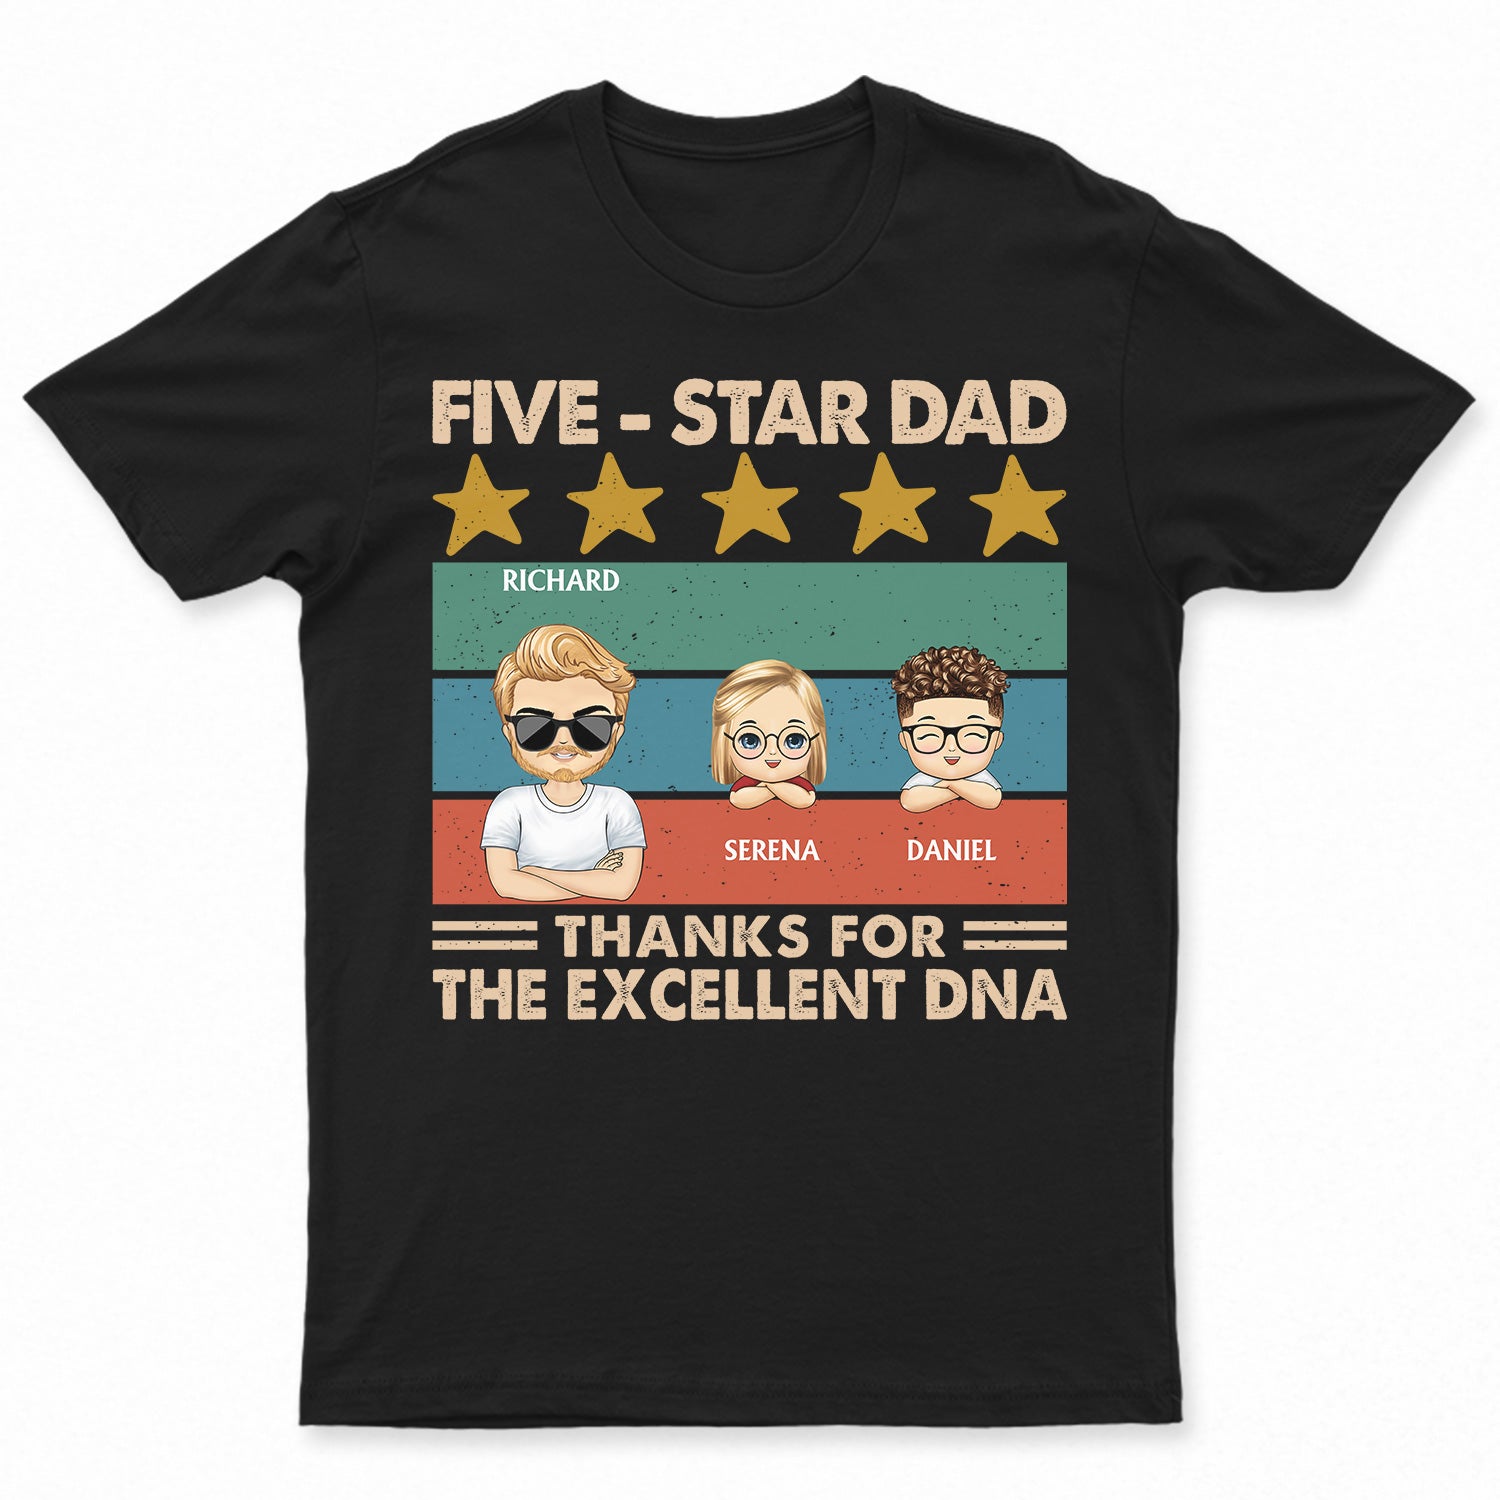 Five-Star Dad Thanks For The Excellent DNA - Birthday, Loving Gift For Father, Grandpa, Grandfather - Personalized Custom T Shirt